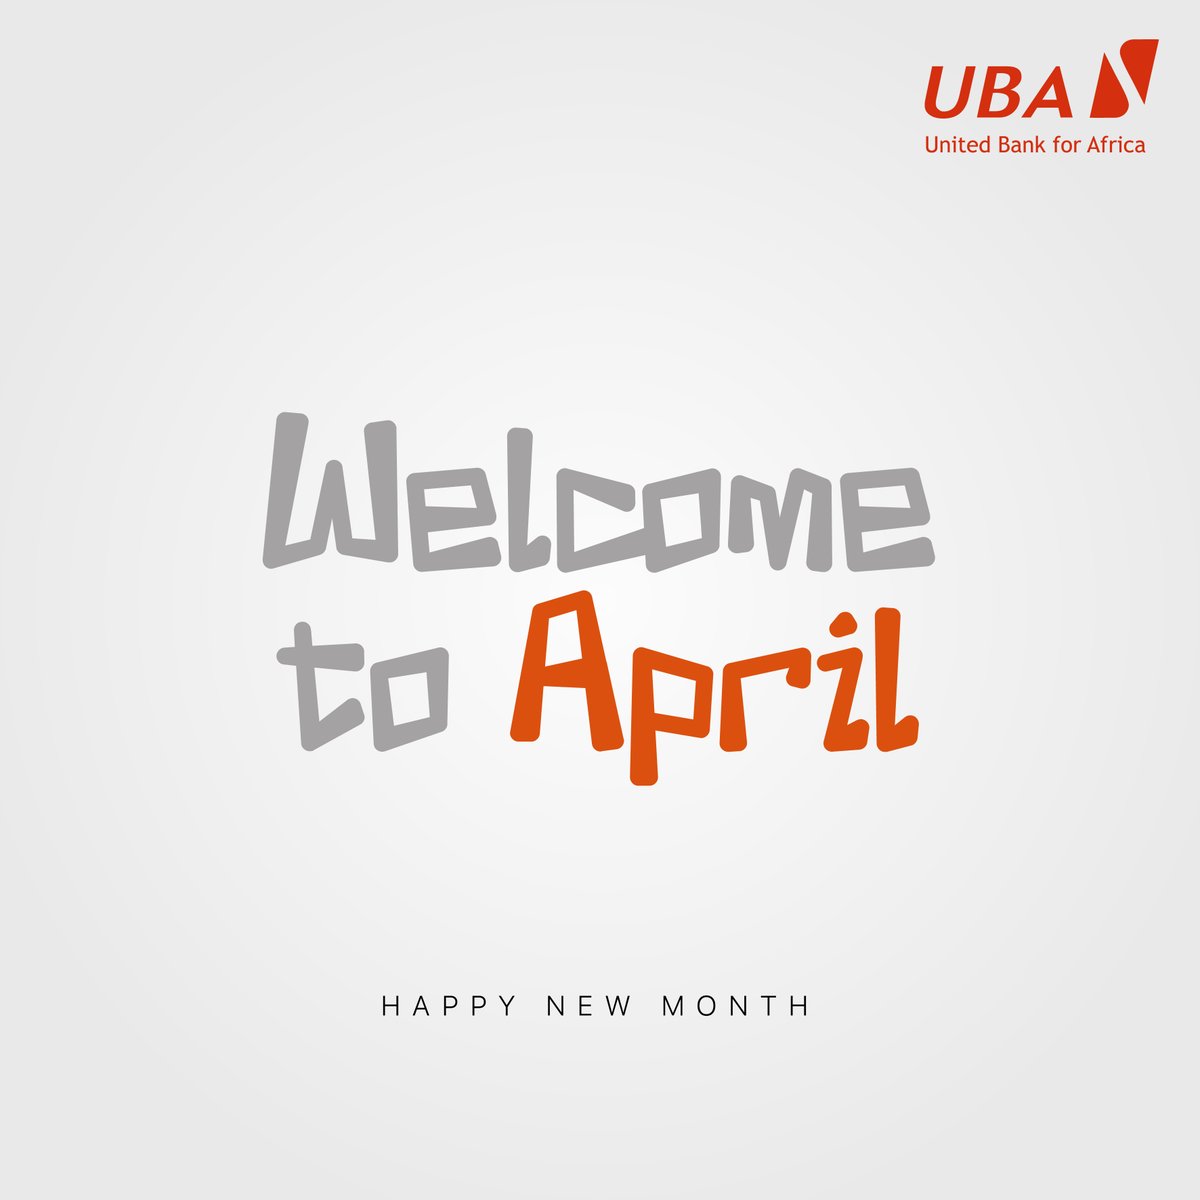 Welcome to the New Month. May your April be EPIC! We are excited and very expectant. #NewMonth #NewMonthNewGoals #AfricasGlobalBank